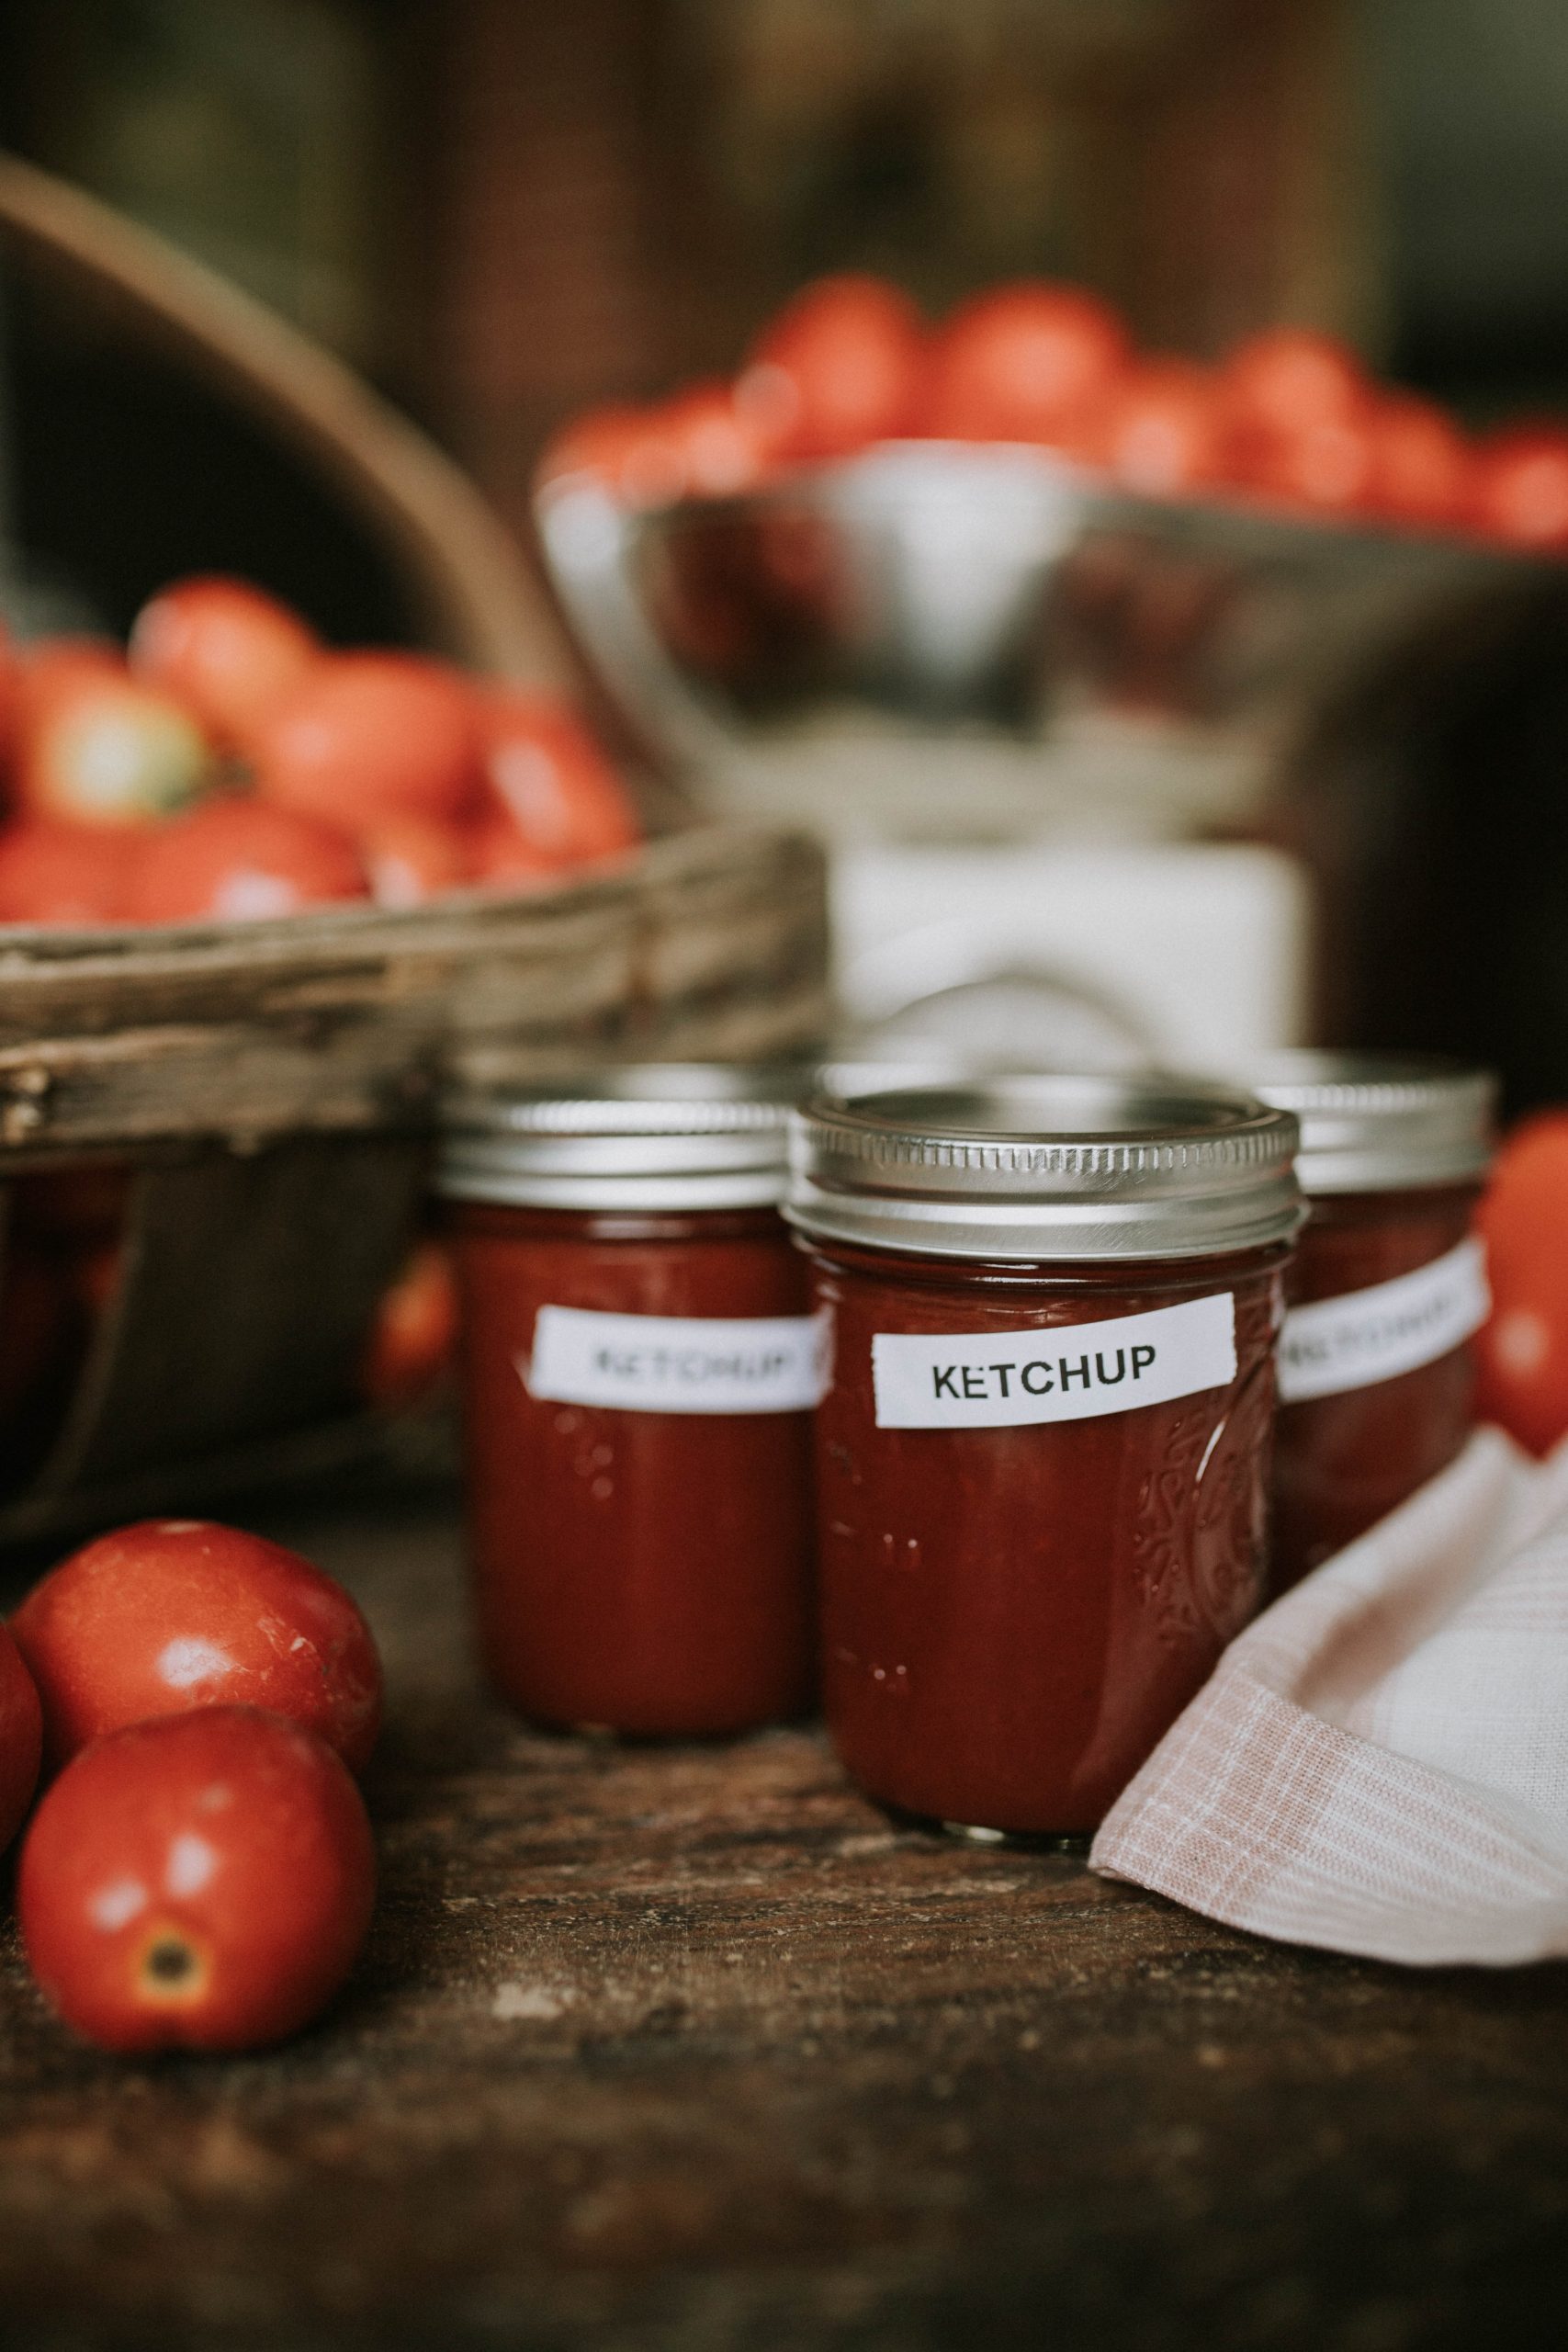 Homemade Ketchup from heirloom tomatoes